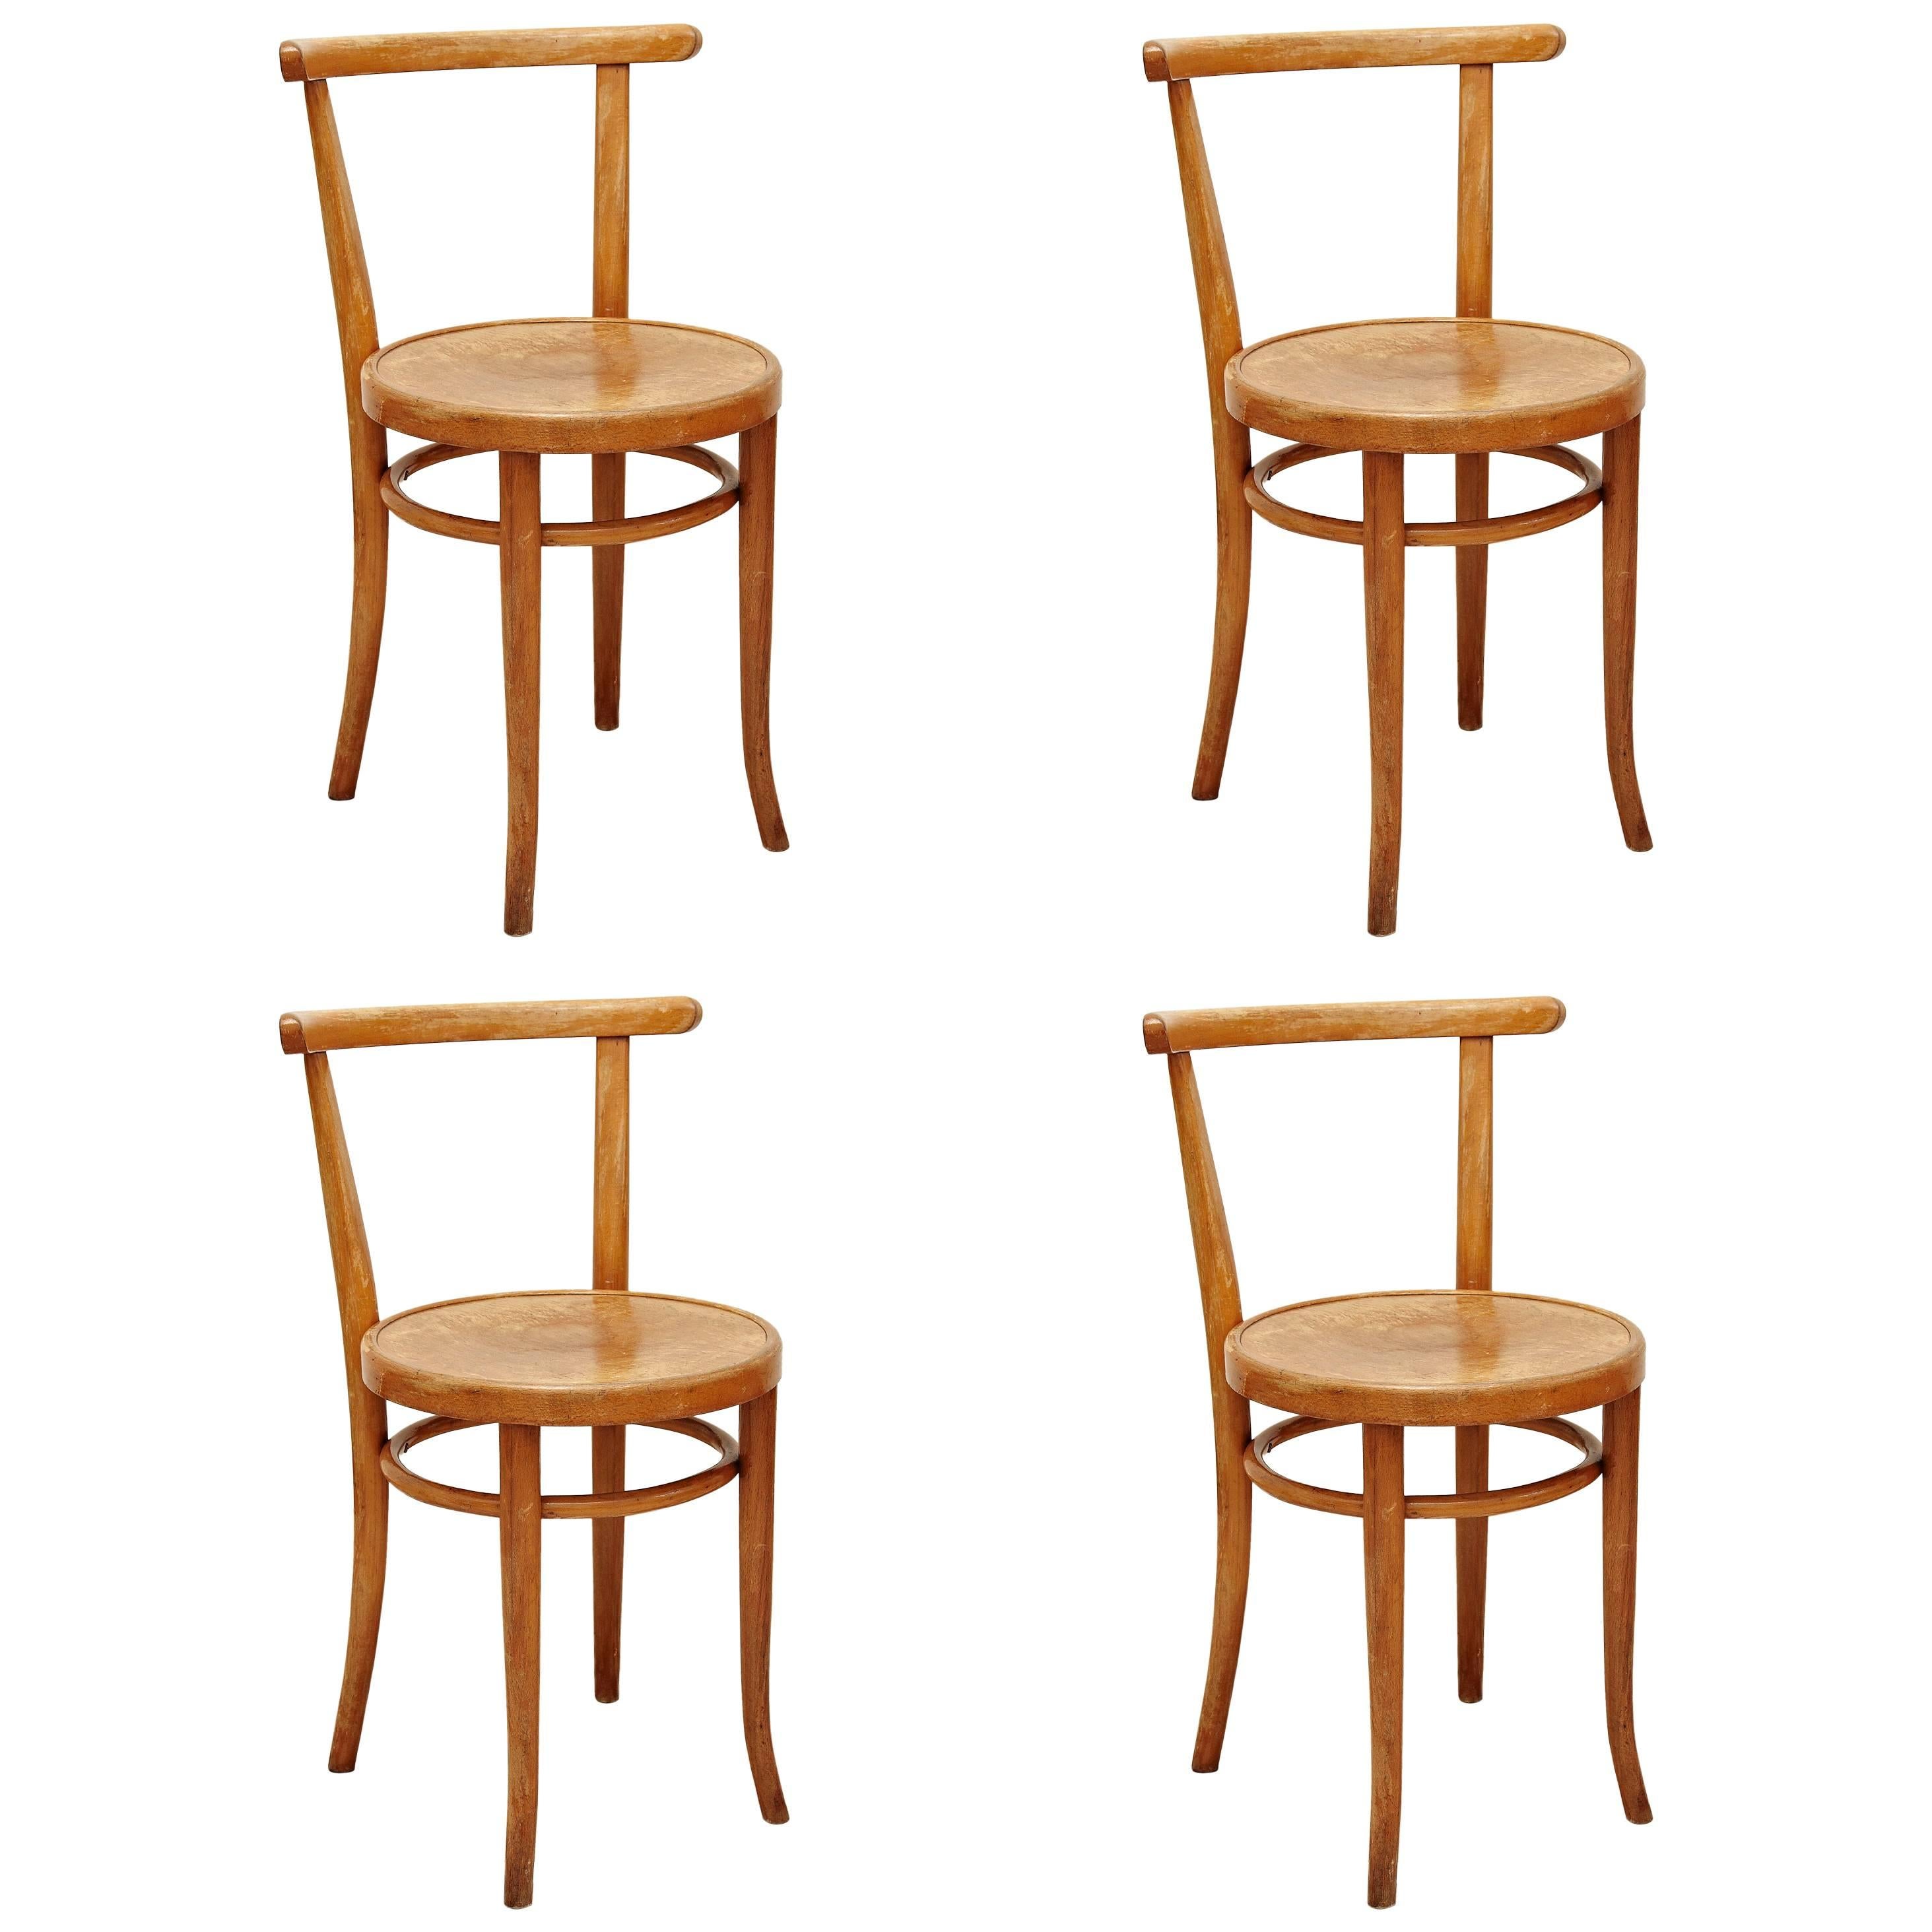 Set of Four Thonet 51 Chair by Auguste Thonet for Thonet